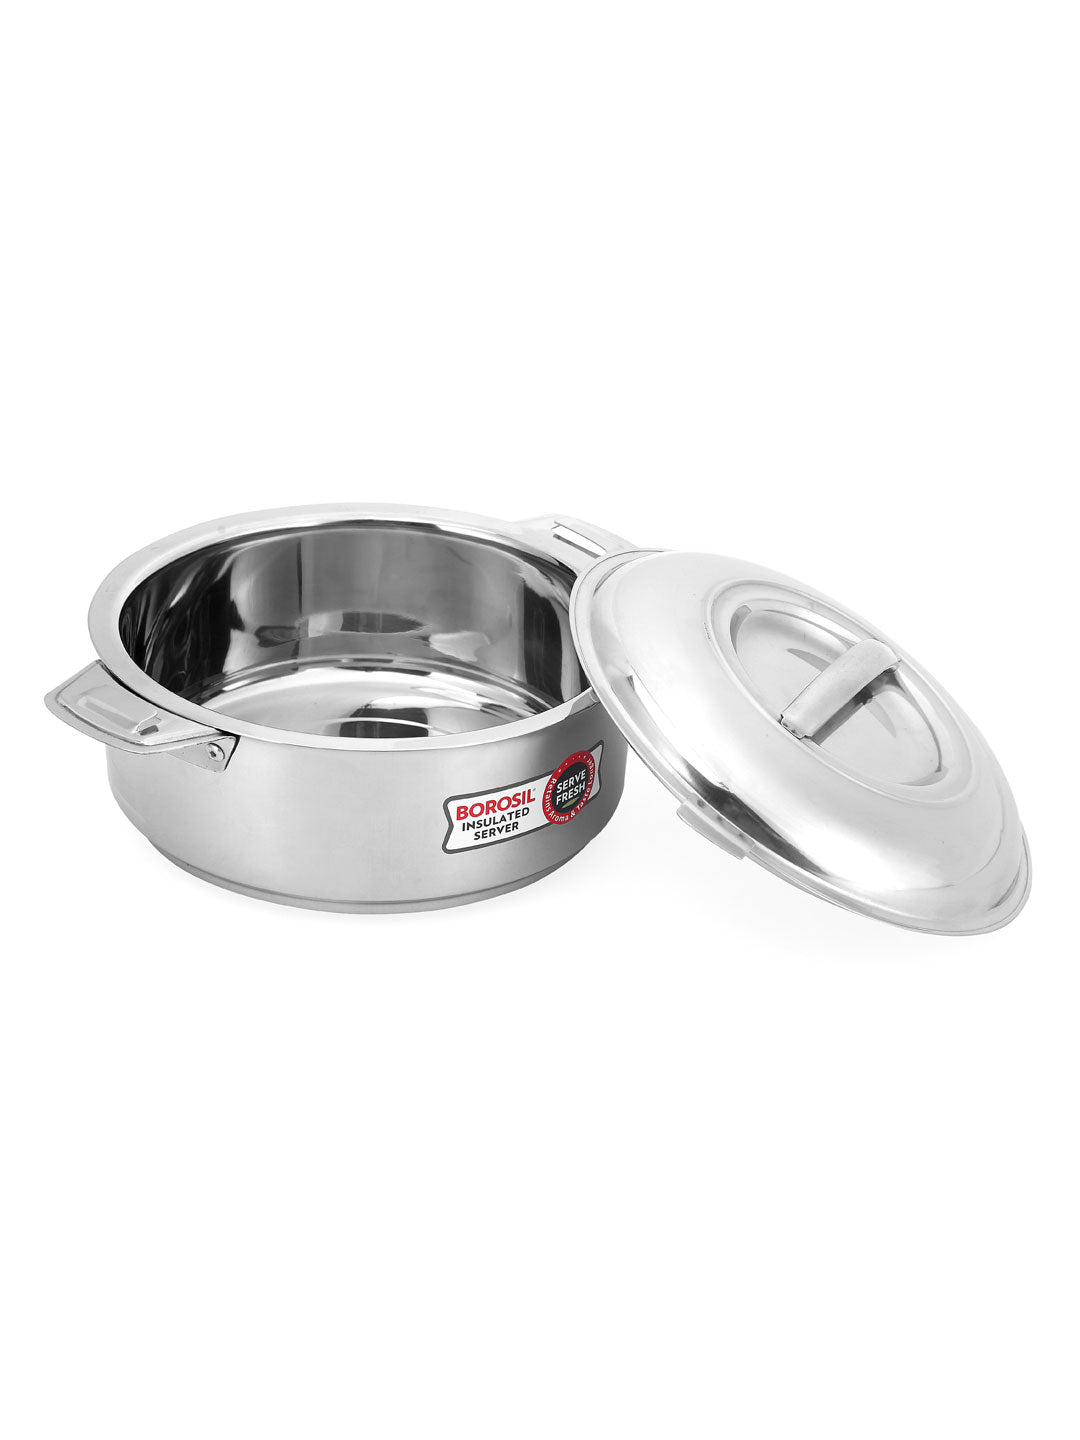 Insulated 1200 ml Casserole with Lid (Silver)